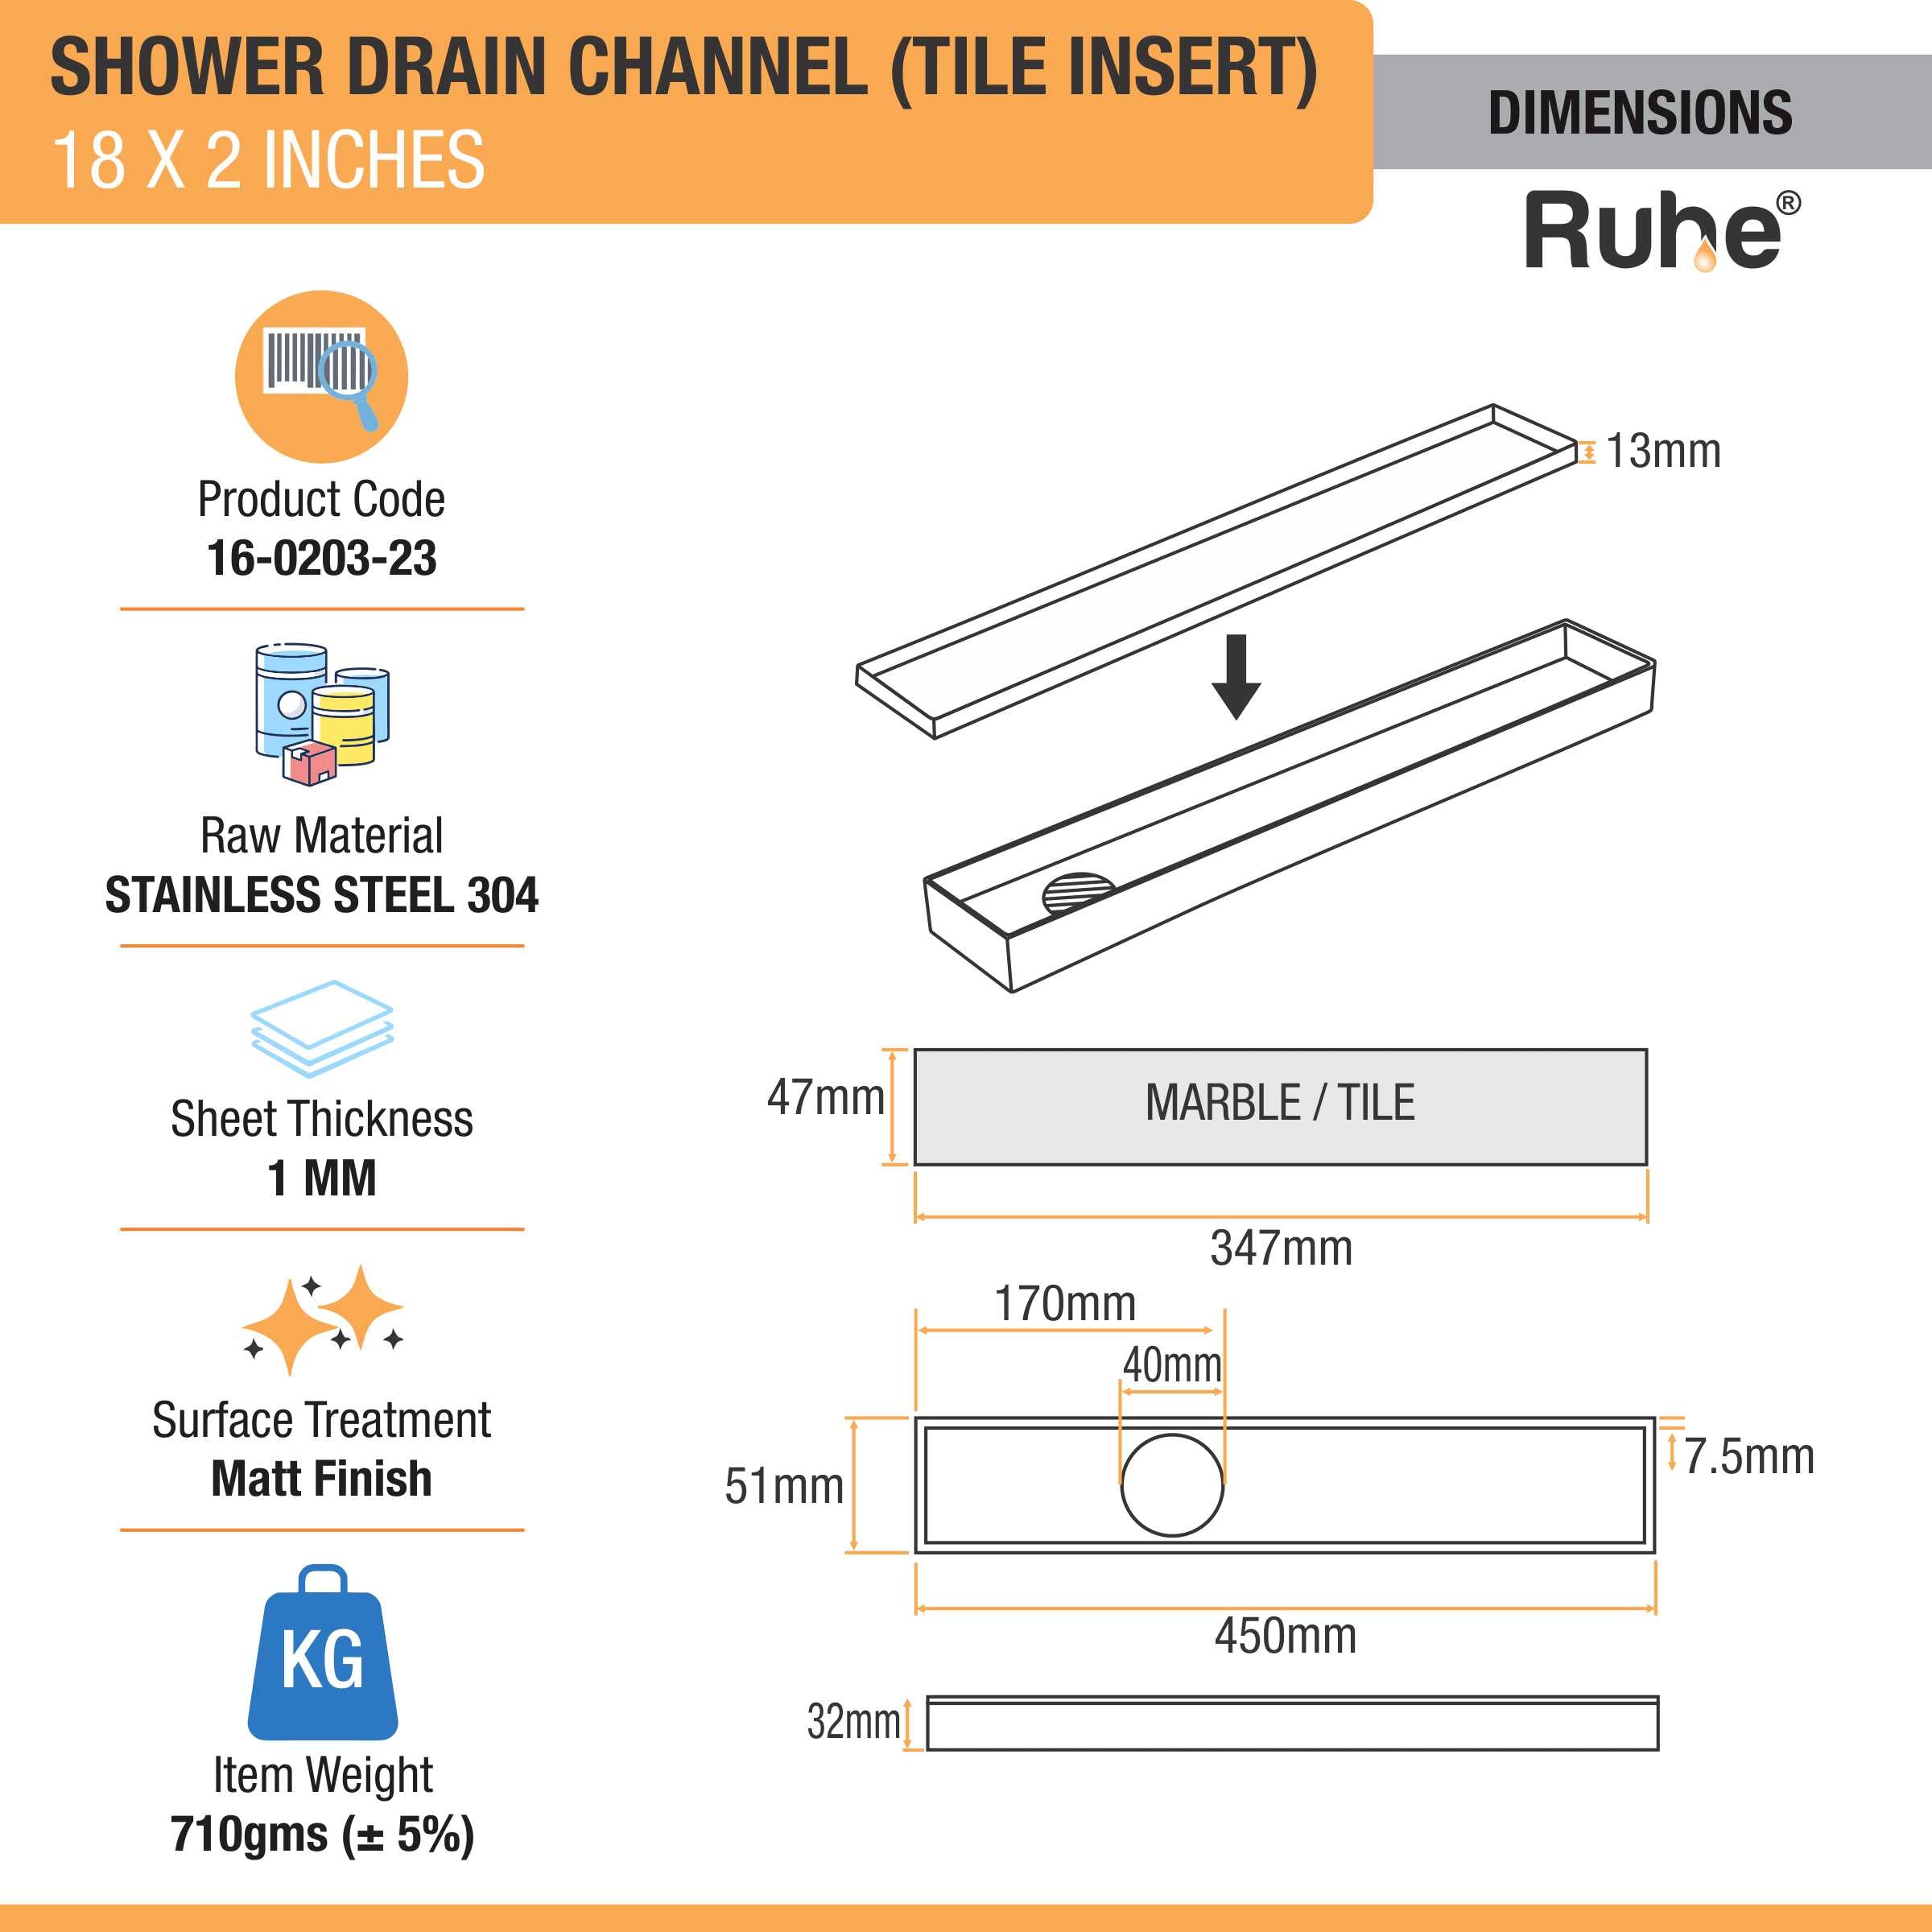 Tile Insert Shower Drain Channel (18 x 2 Inches) (304 Grade) dimensions and size